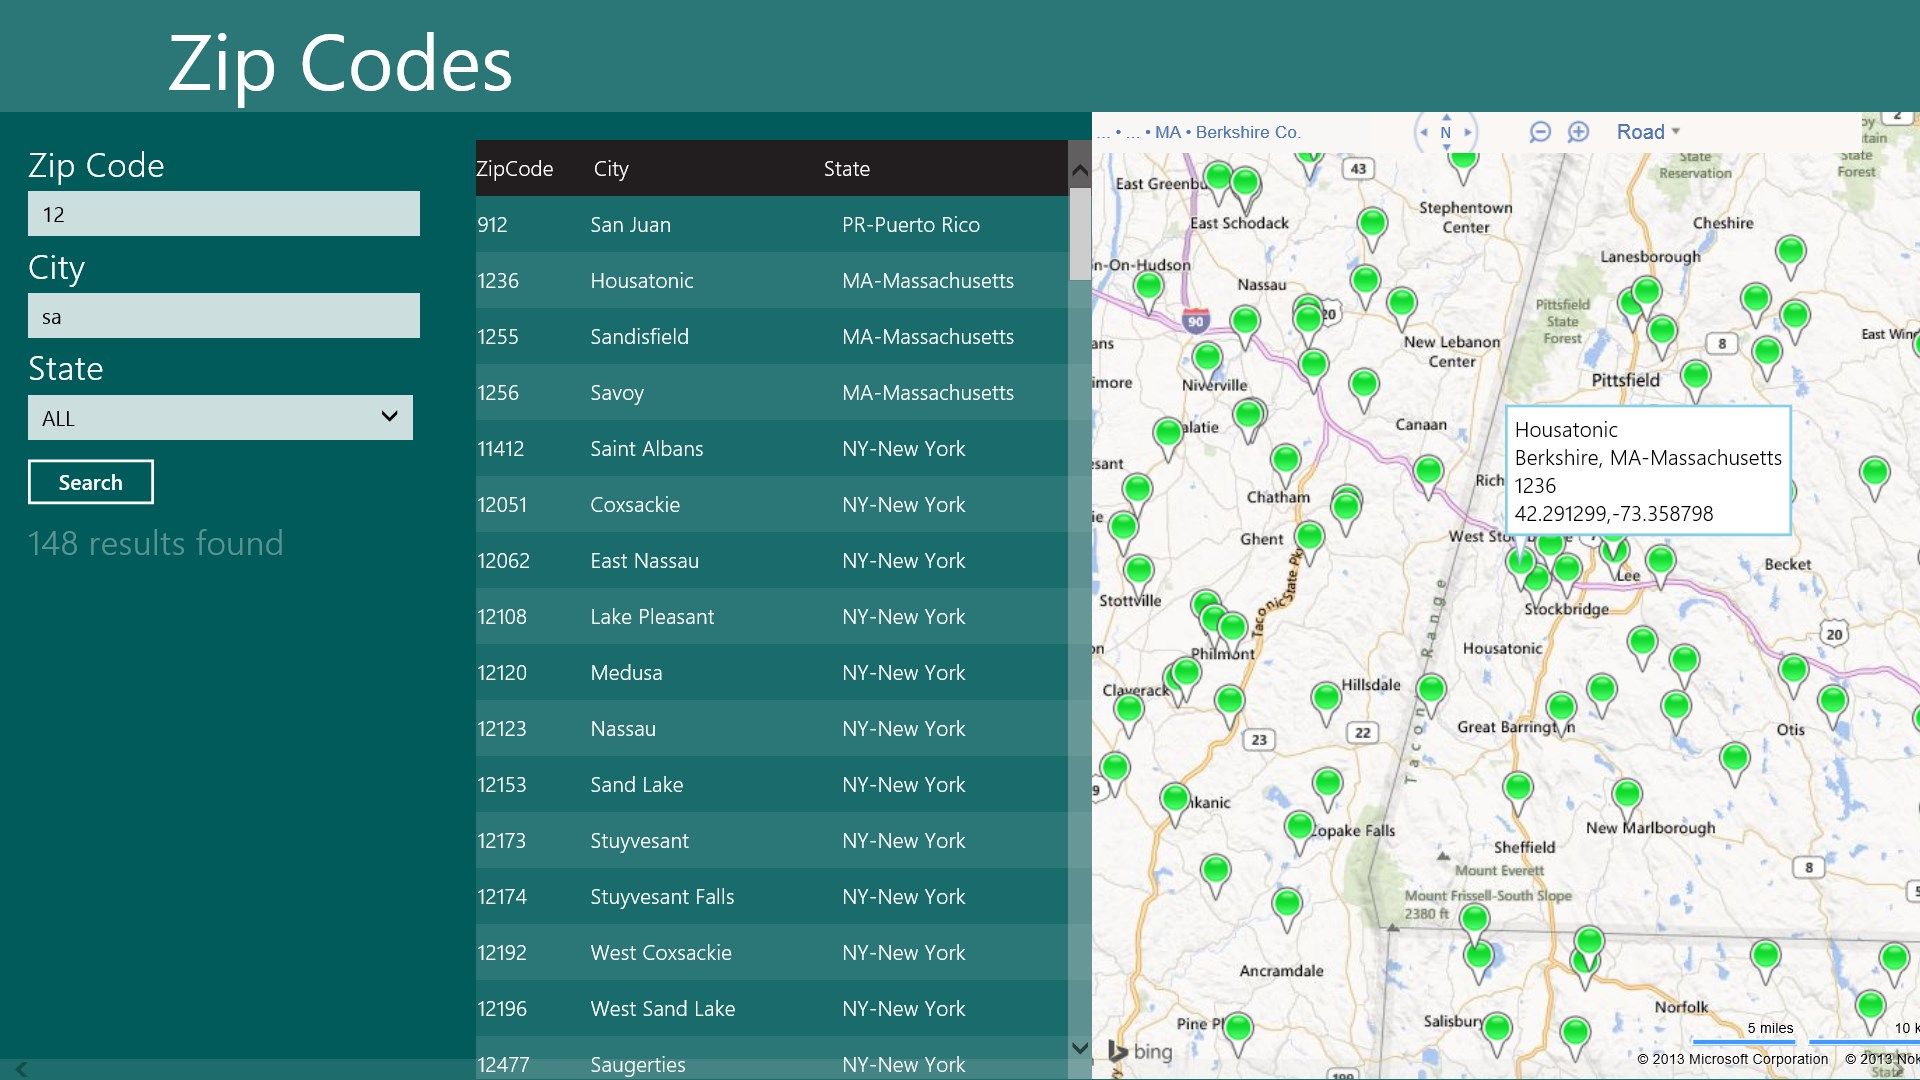 Search based on zip code or city or state